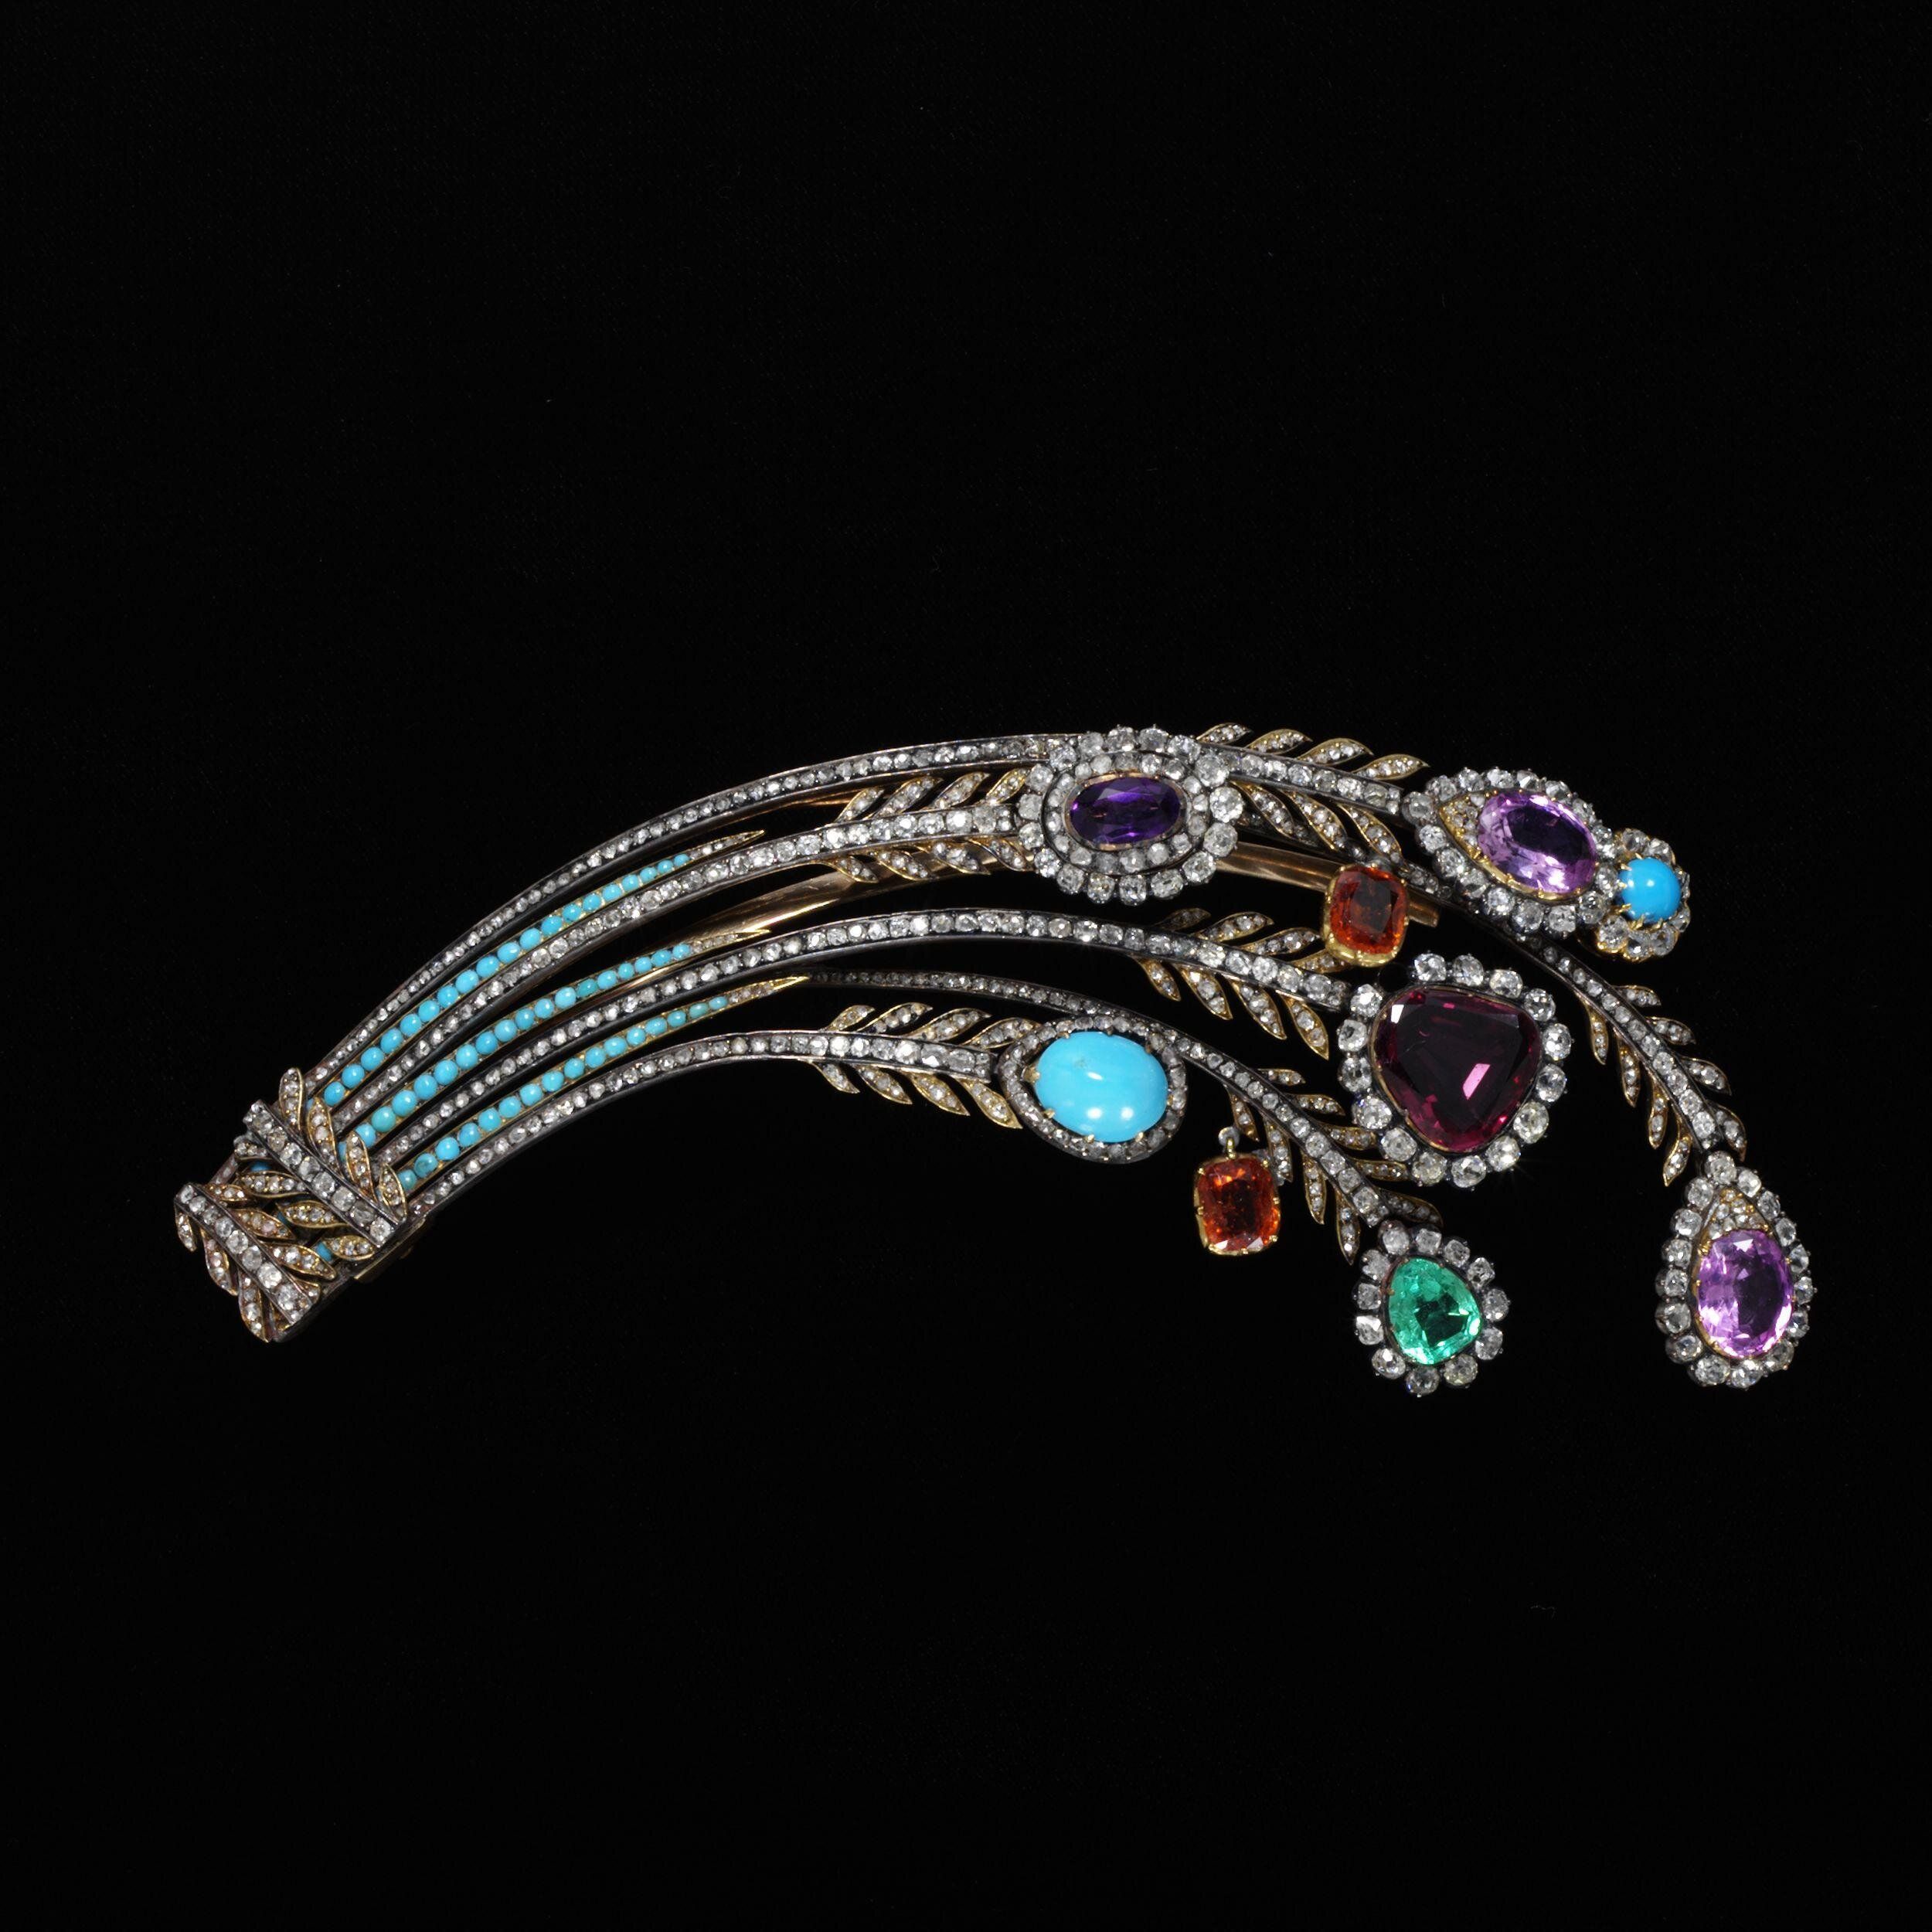 Aigrette with diamonds, turquoise, an emerald and other colored stones, 1810. The Victoria and Albert Museum. 